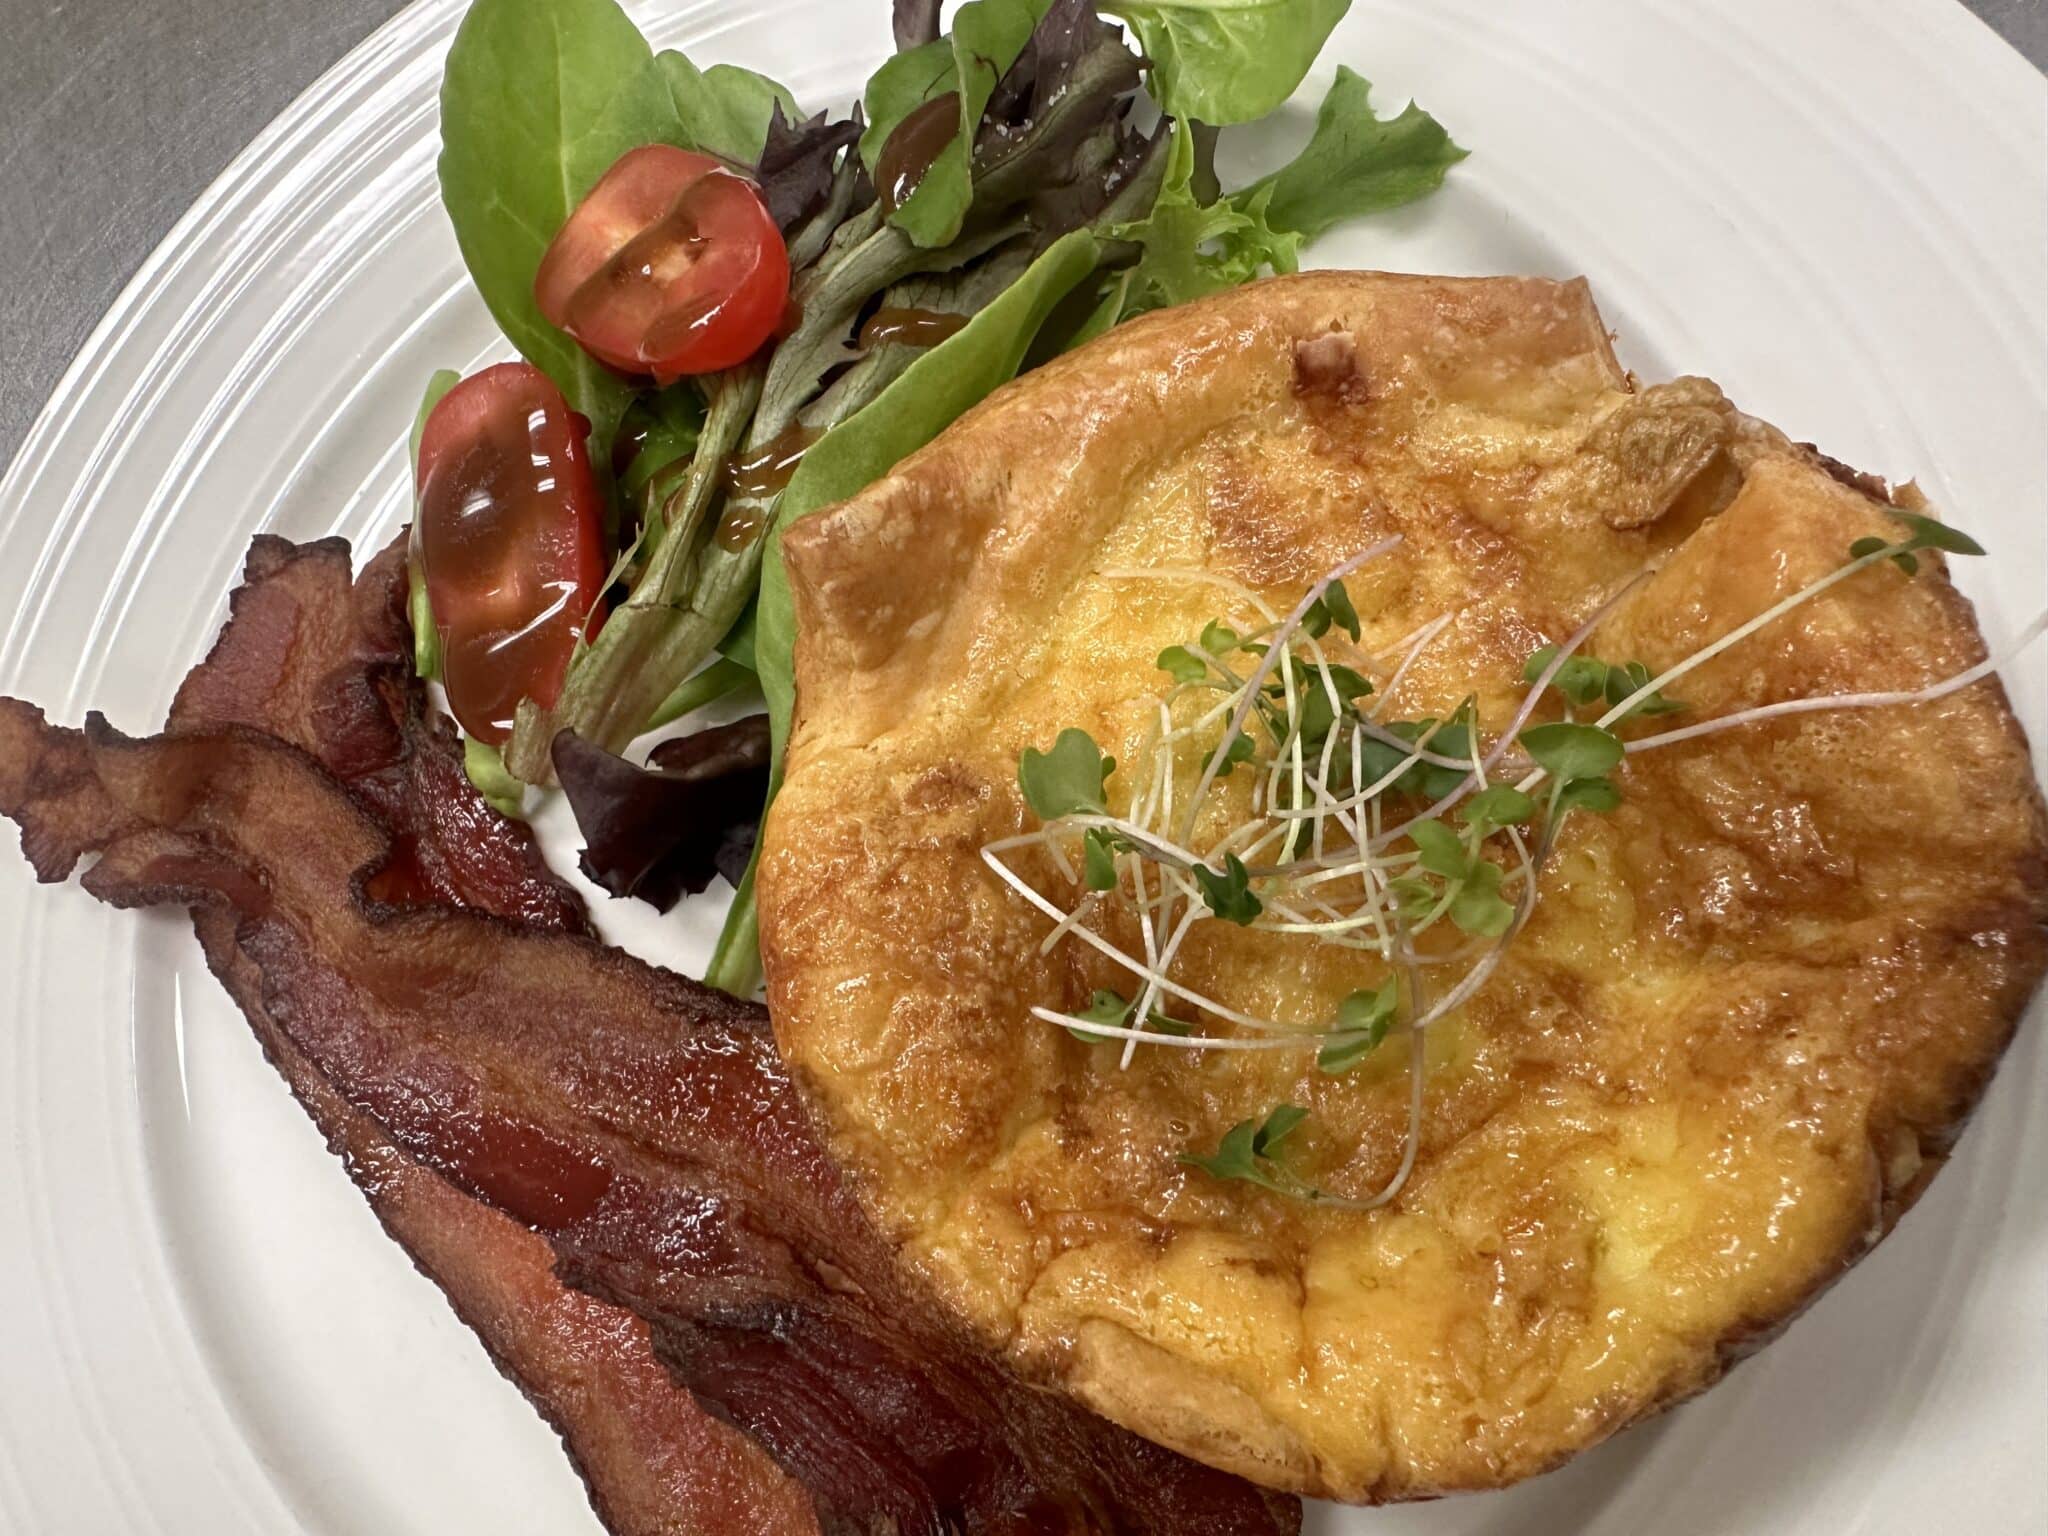 Breakfast galette with bacon and side greens